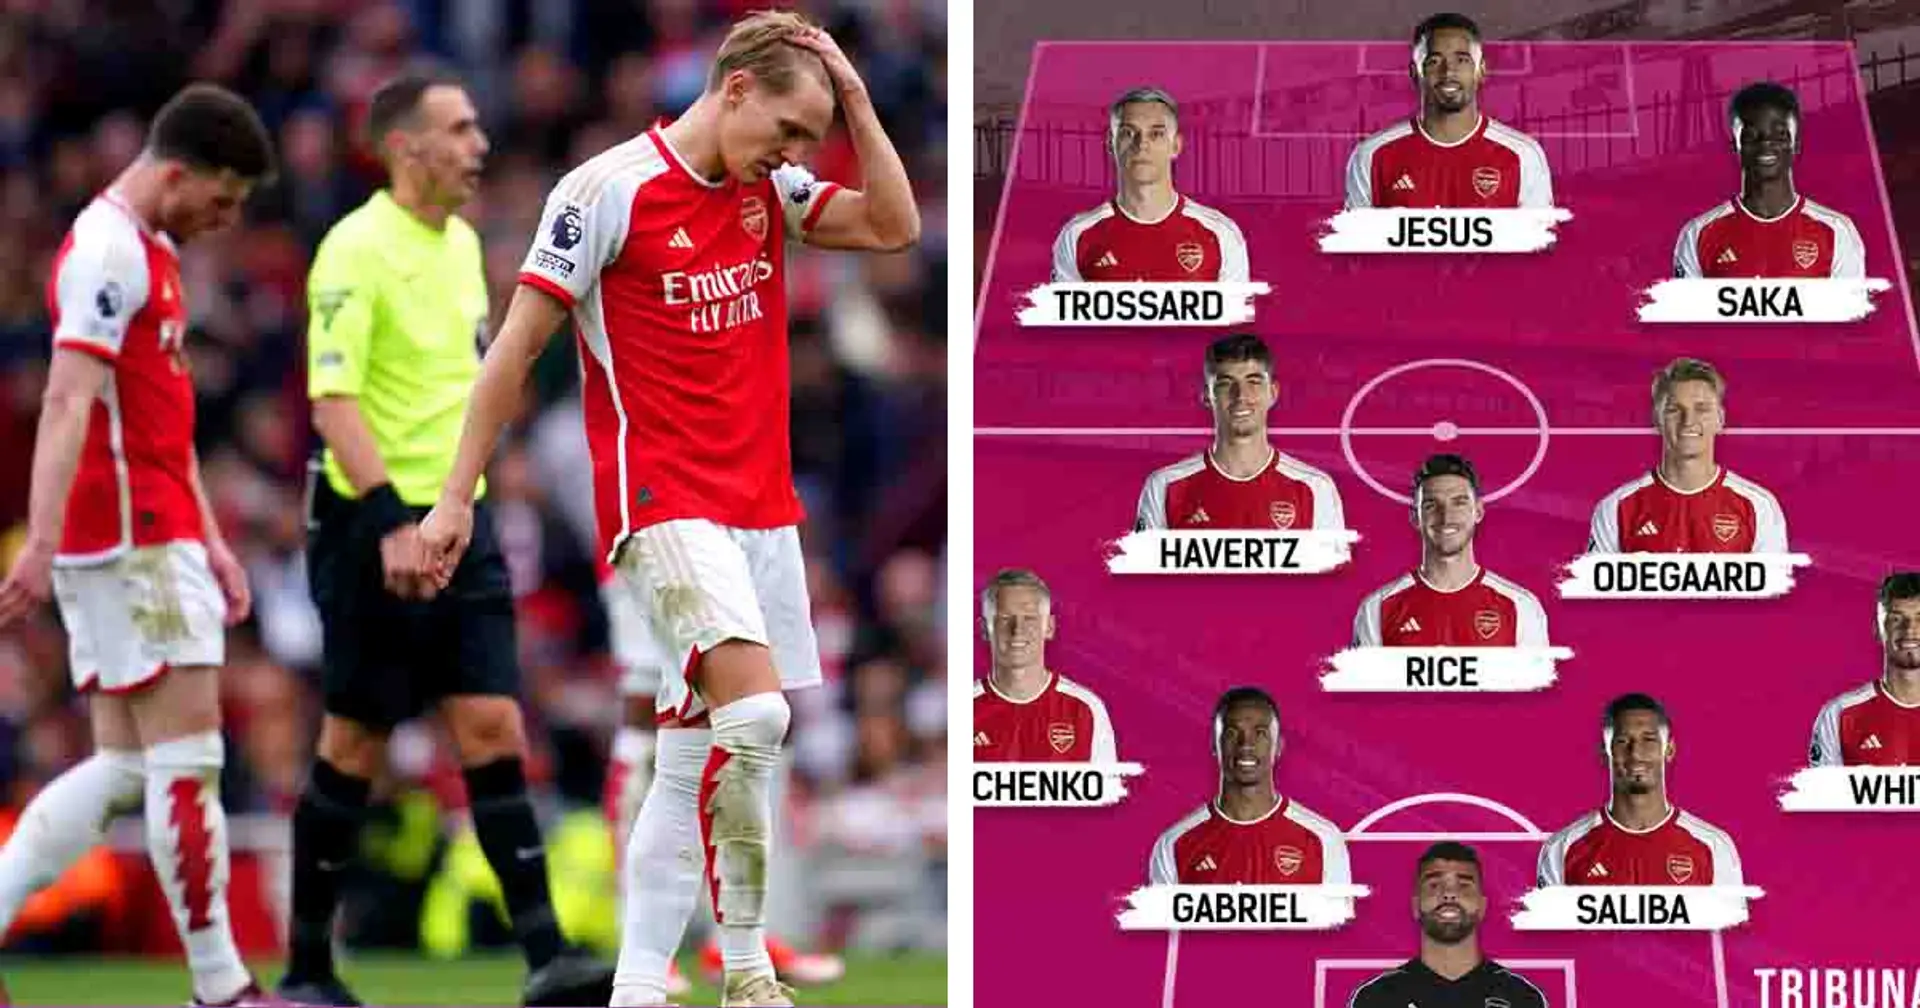 Arsenal's biggest positives in Aston Villa loss shown in lineup - only two players feature